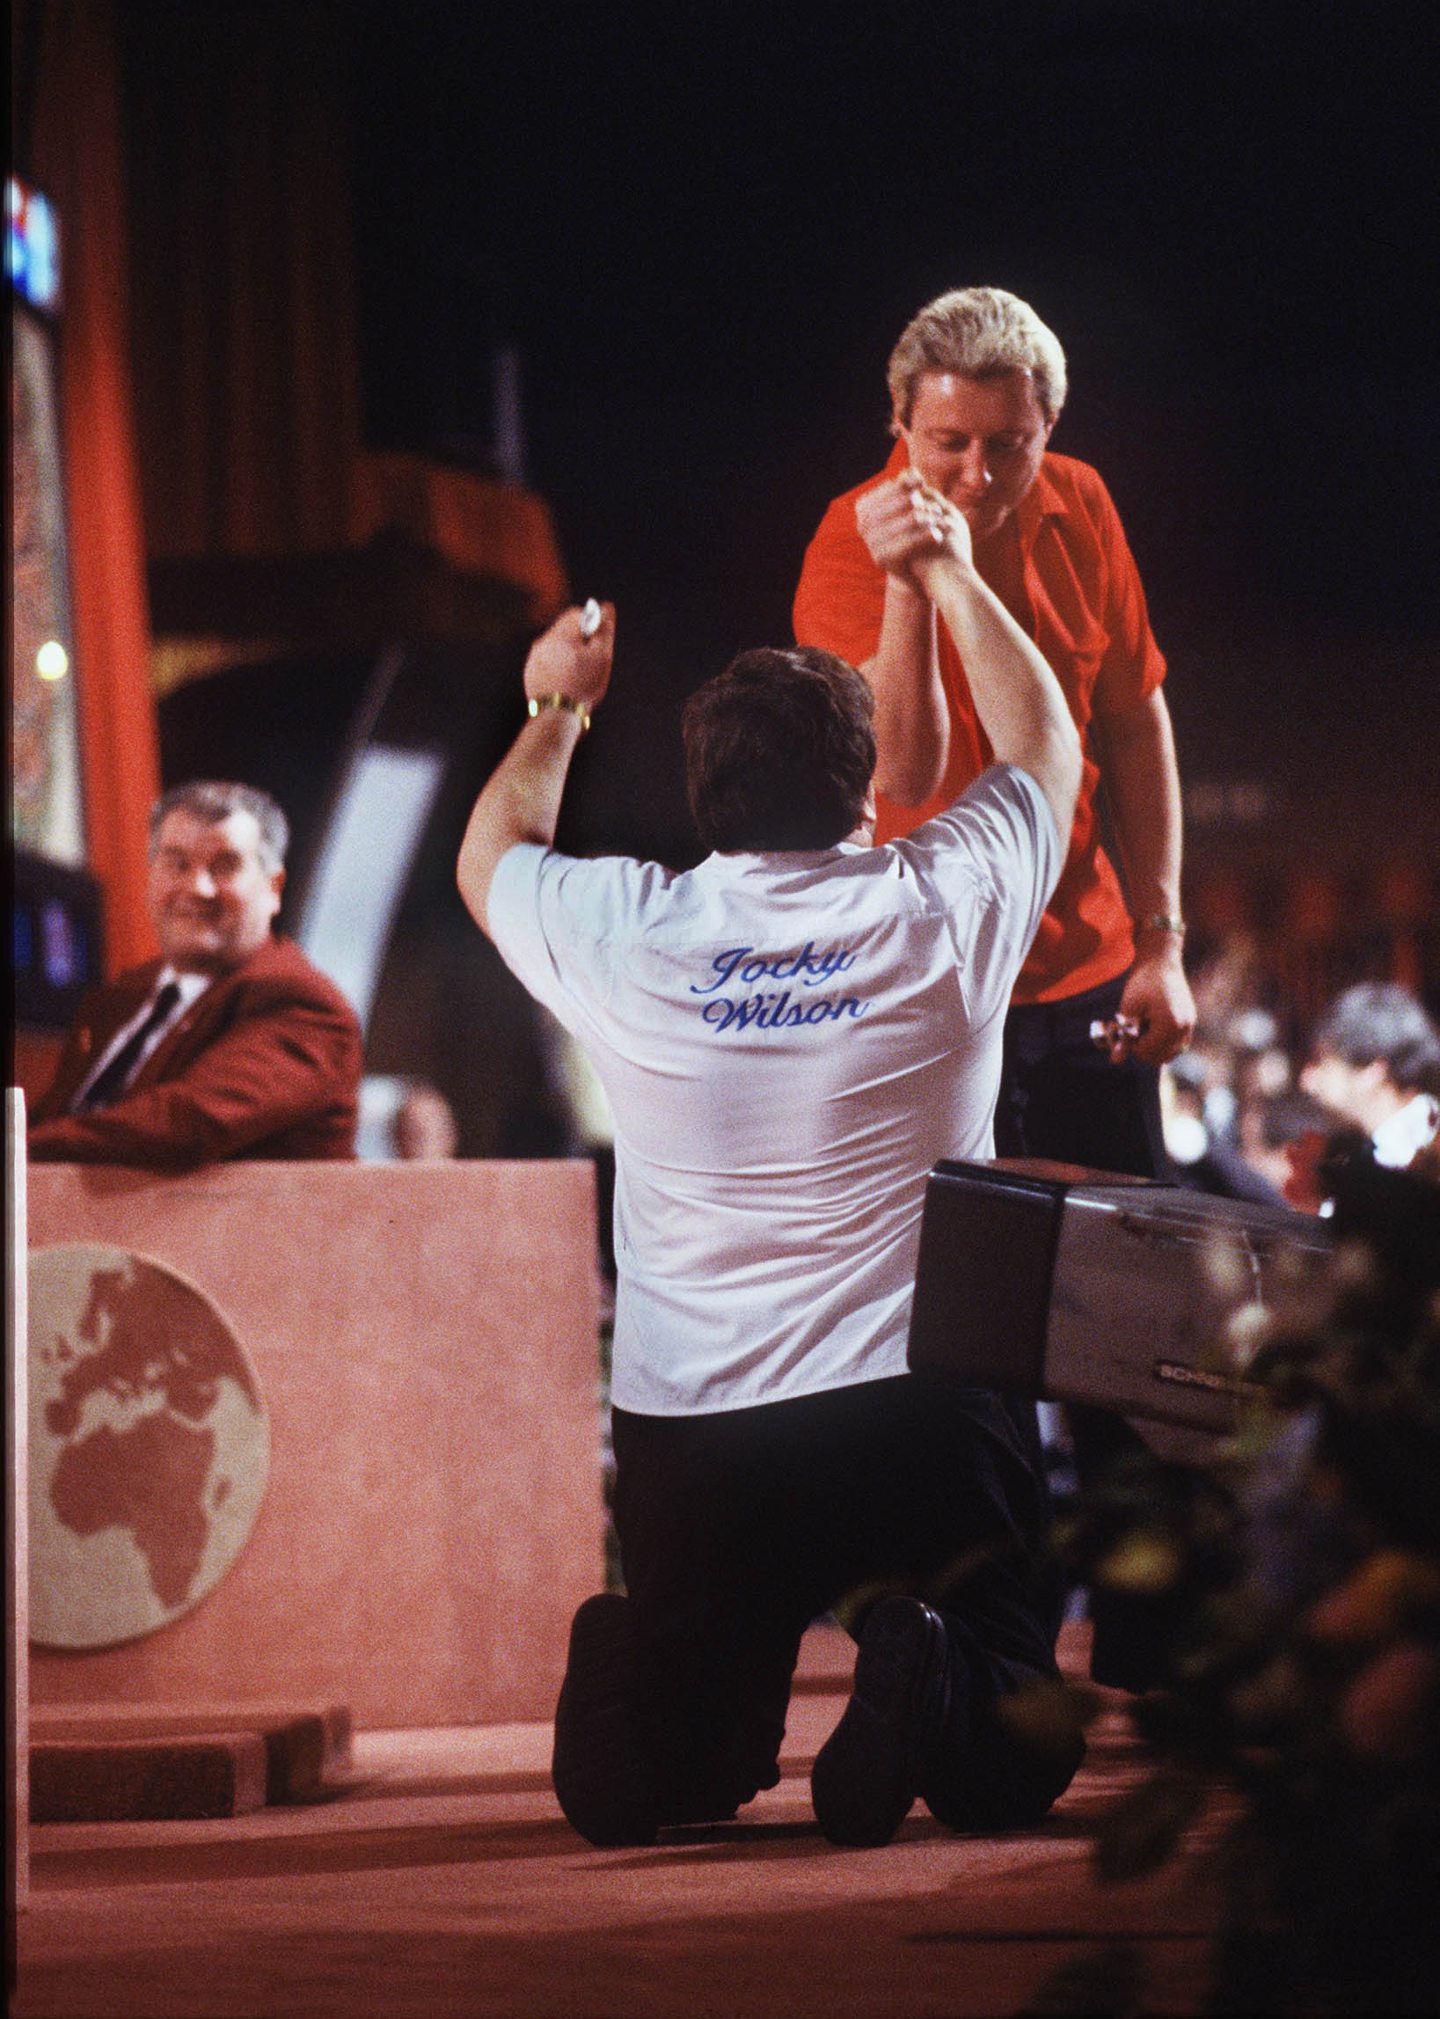 Eric Bristow congratulates his great rival after Jocky sunk to his knees on winning. Image: Shutterstock.